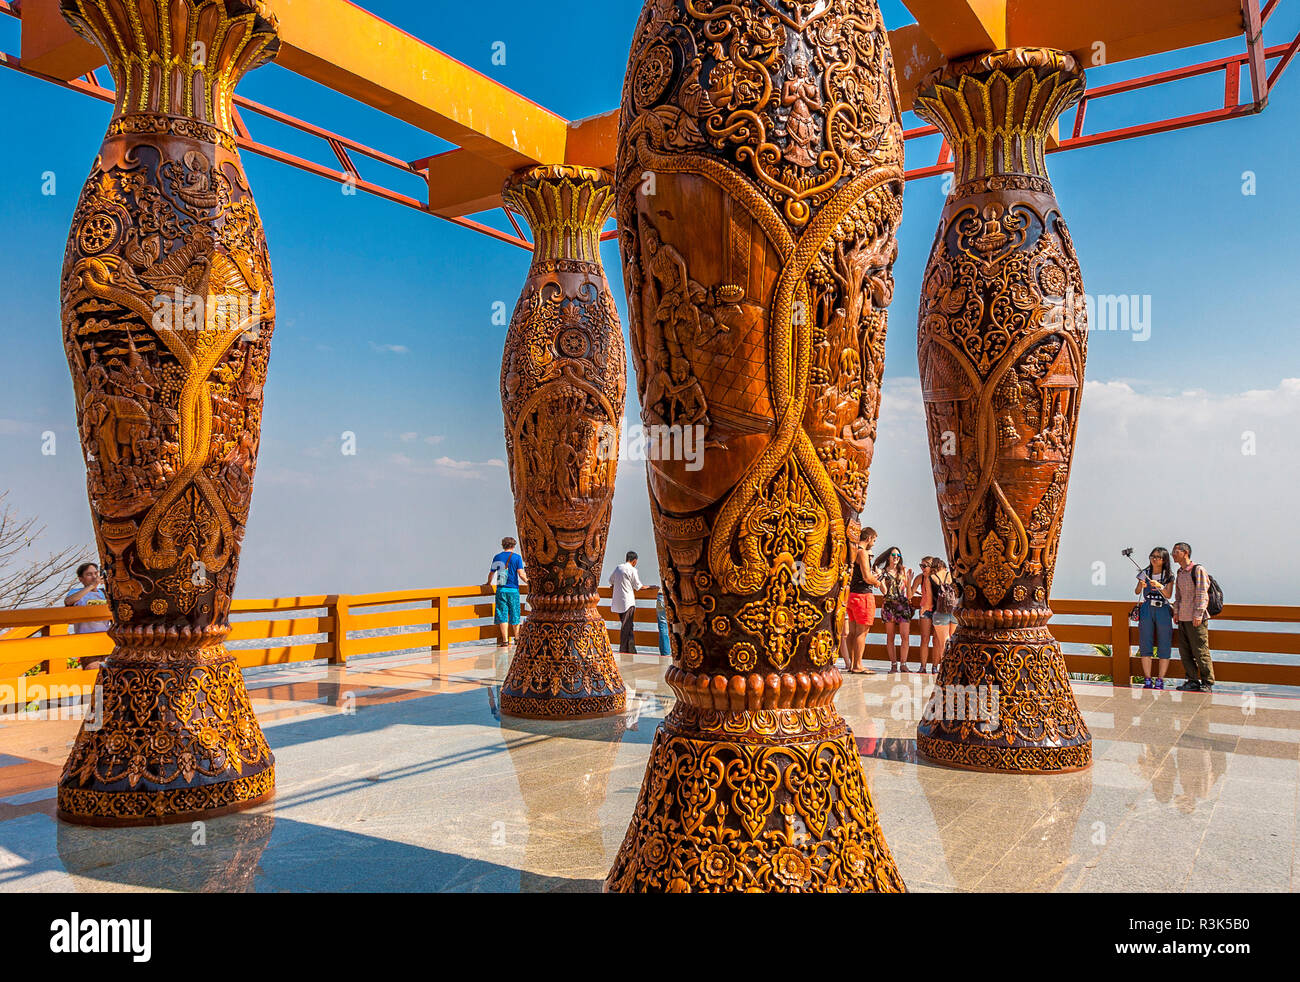 Large carved pillars and toursits on deck overlook of the city of Chiang Mai, Thailand Stock Photo